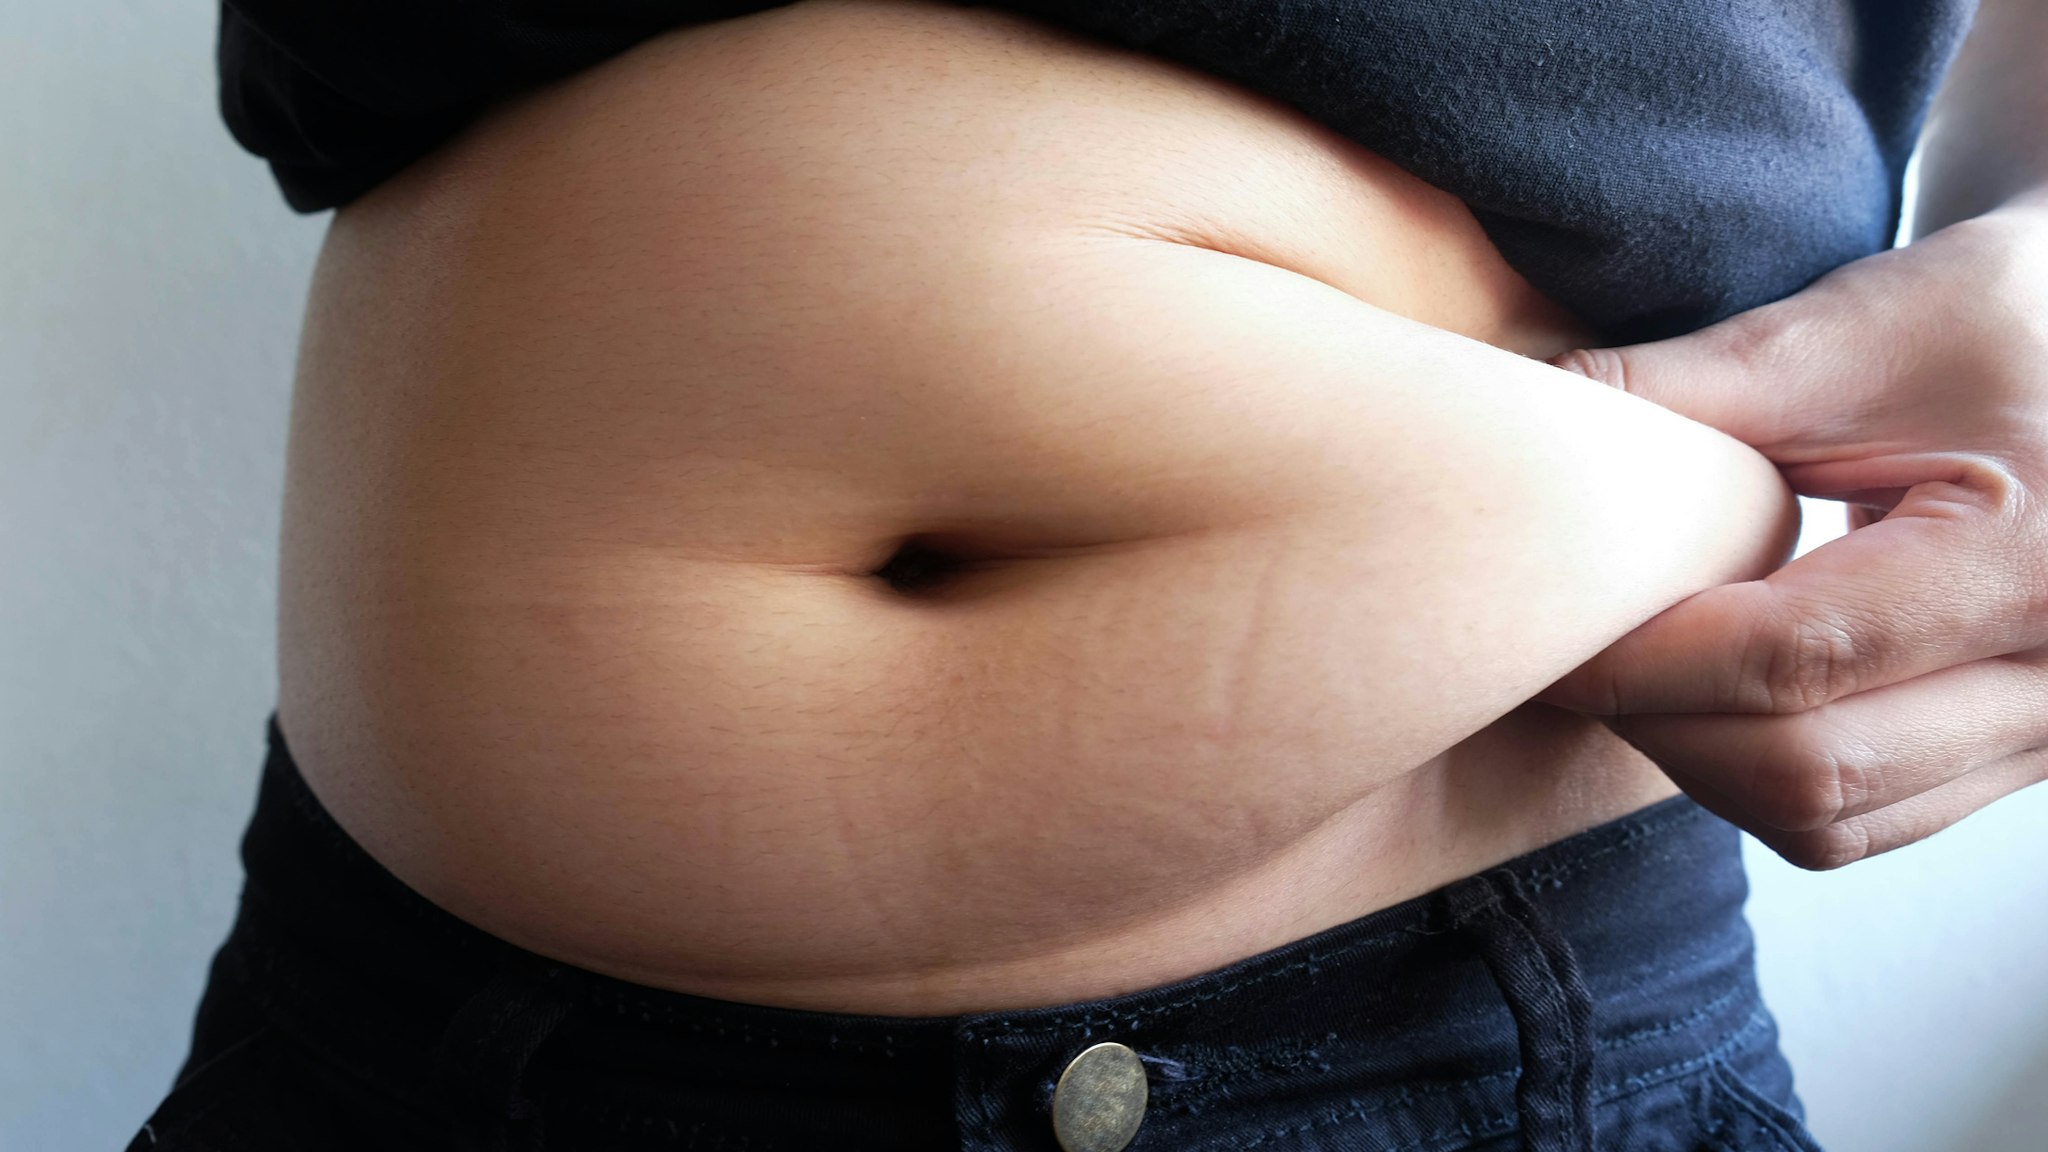 Midsection Of Overweight Woman Holding Stomach Fats While Standing Against Wall - stock photo